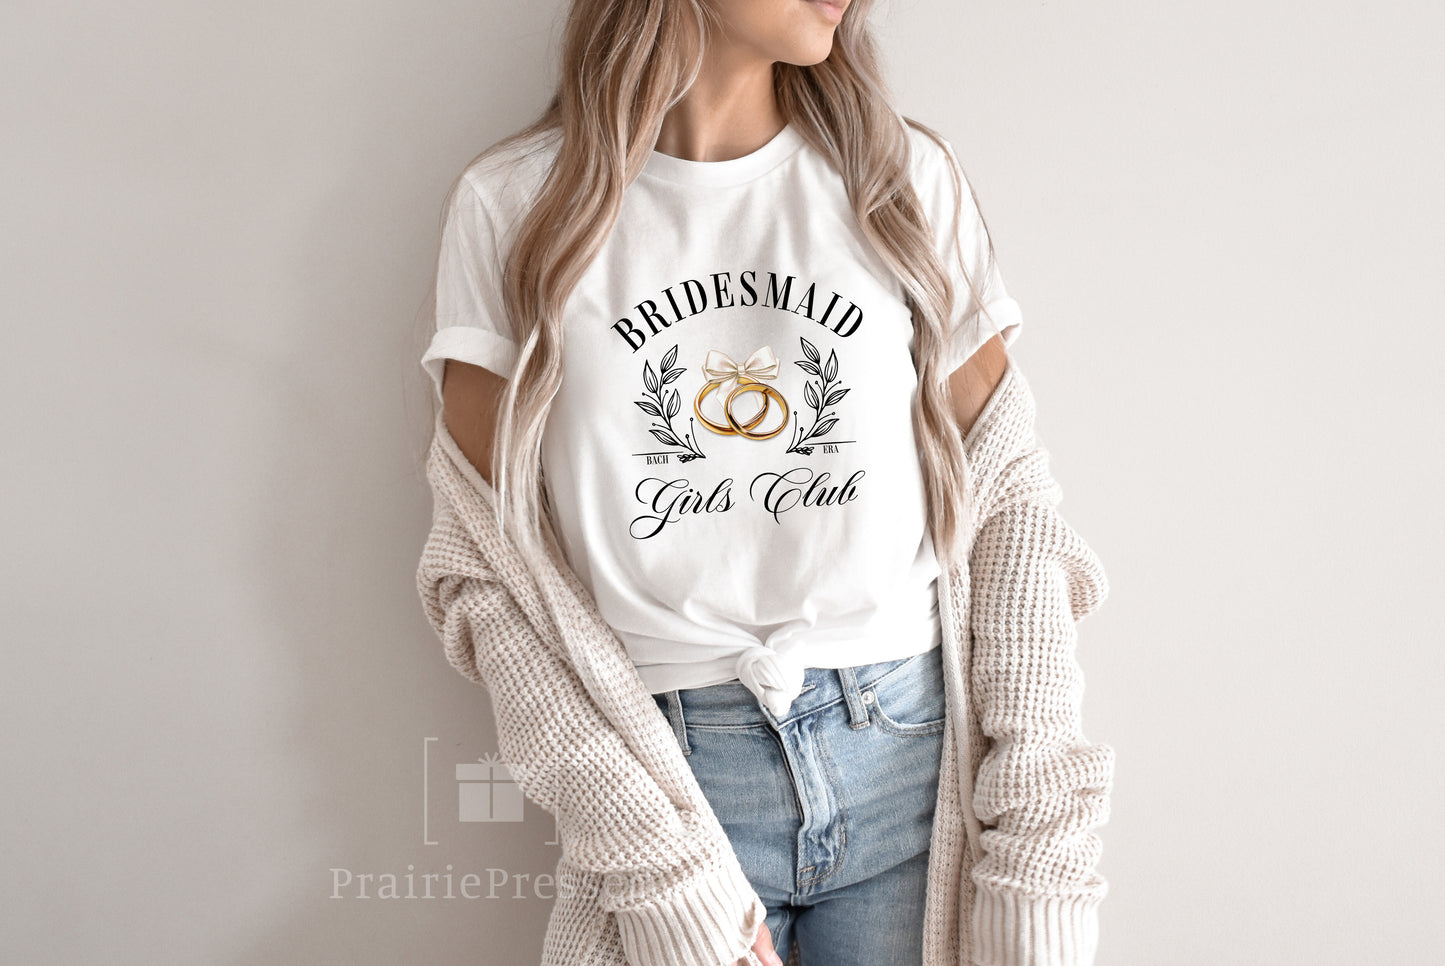 Bridal Party T Shirts - Girls Club Coquette Style